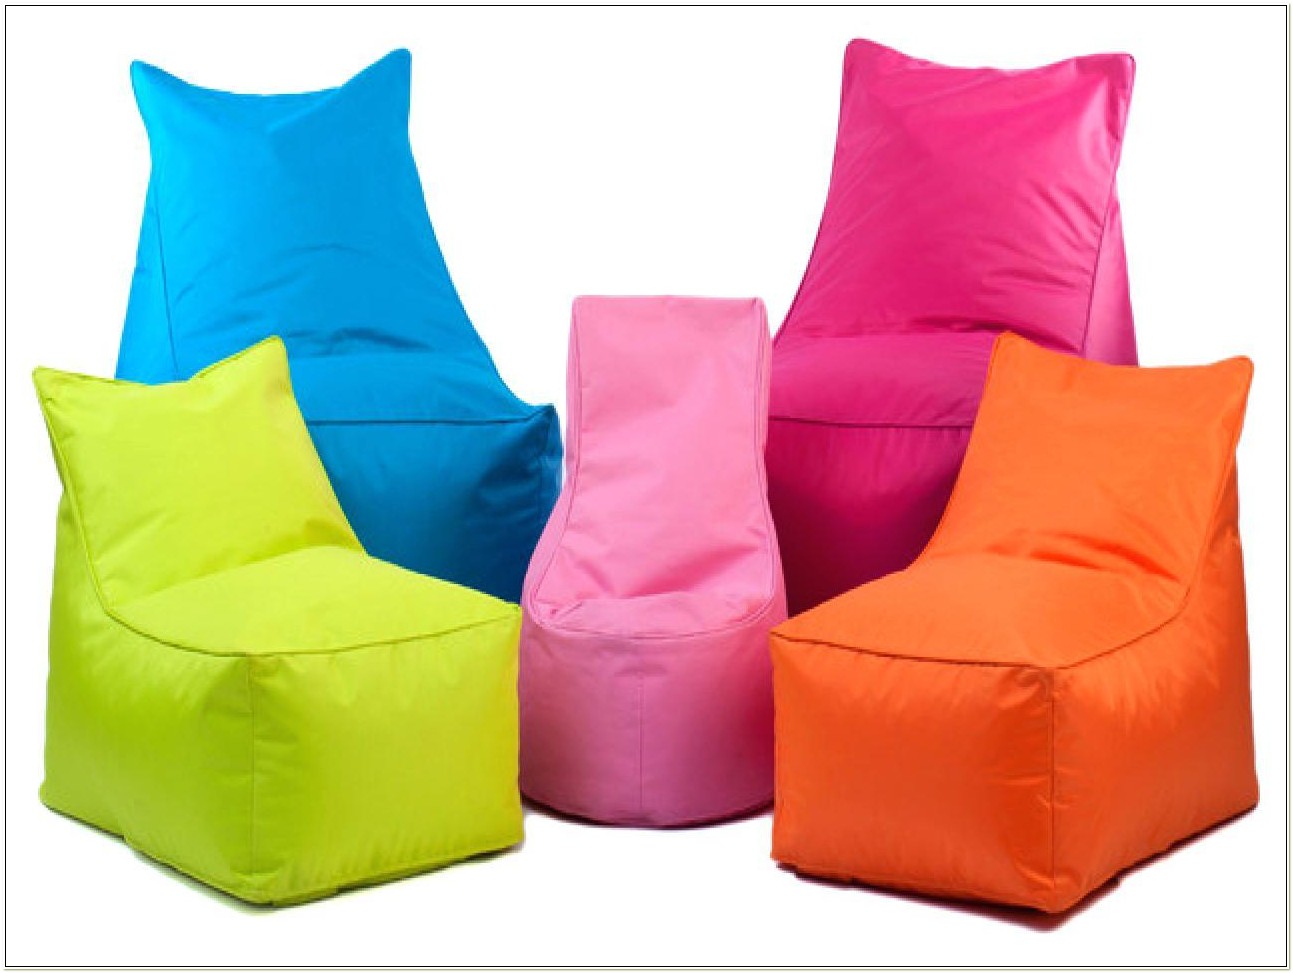 Bean Bag Chairs For Kids Ikea - Chairs : Home Decorating Ideas #Nel0aMN2X3